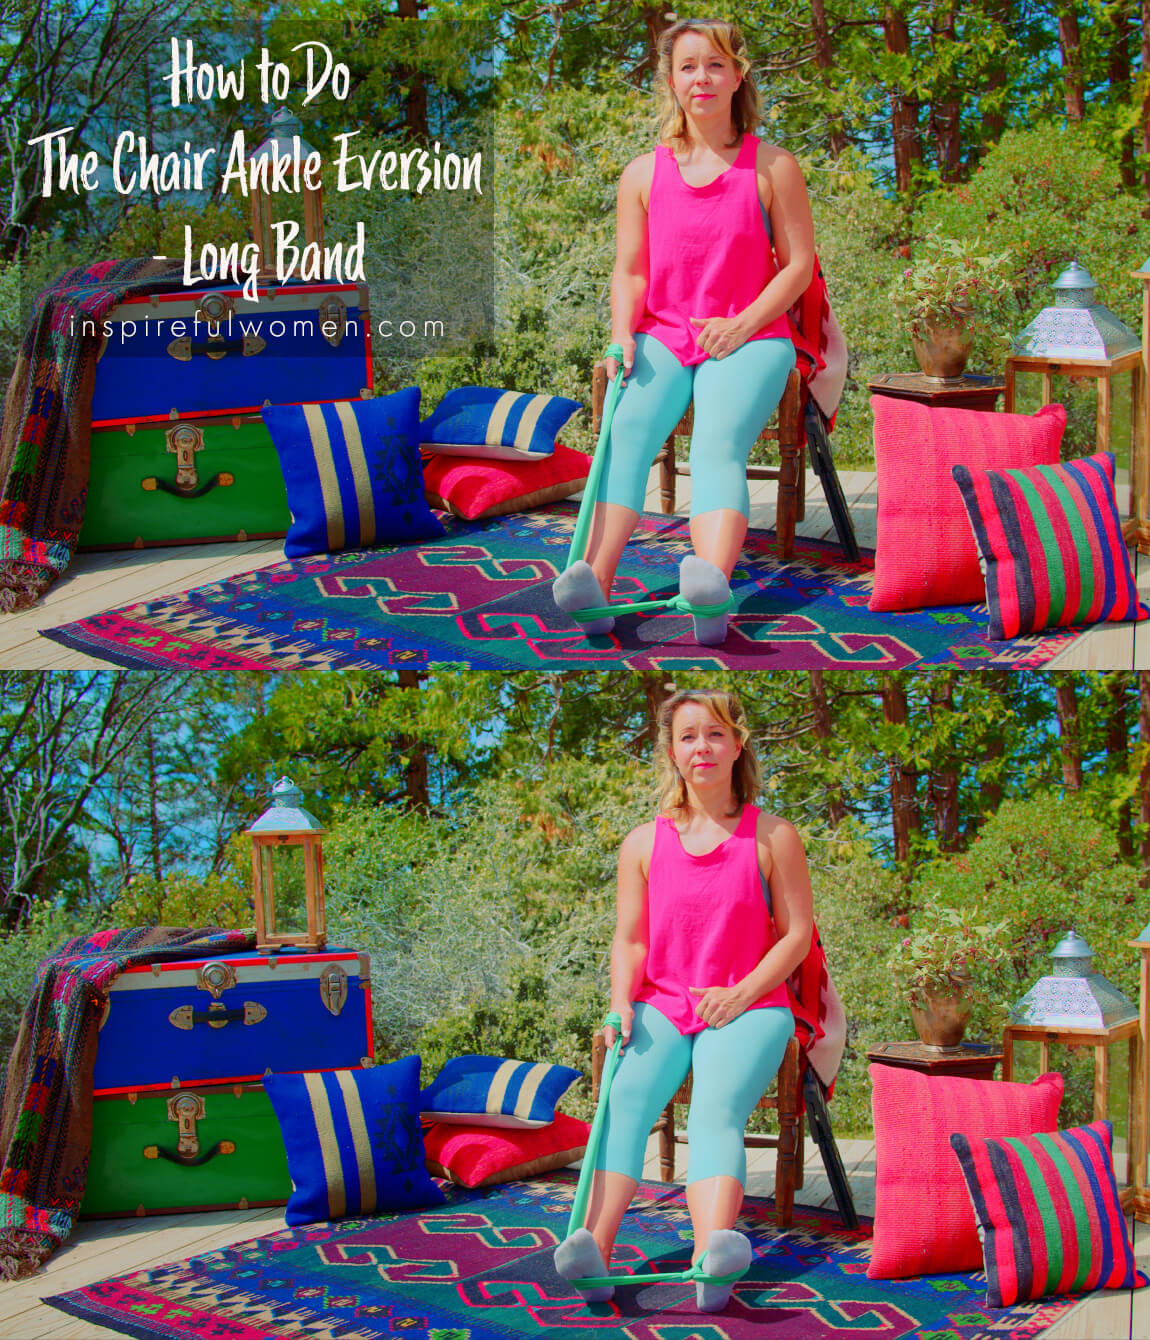 how-to-chair-seated-ankle-eversion-long-band-foot-anchor-workout-proper-form